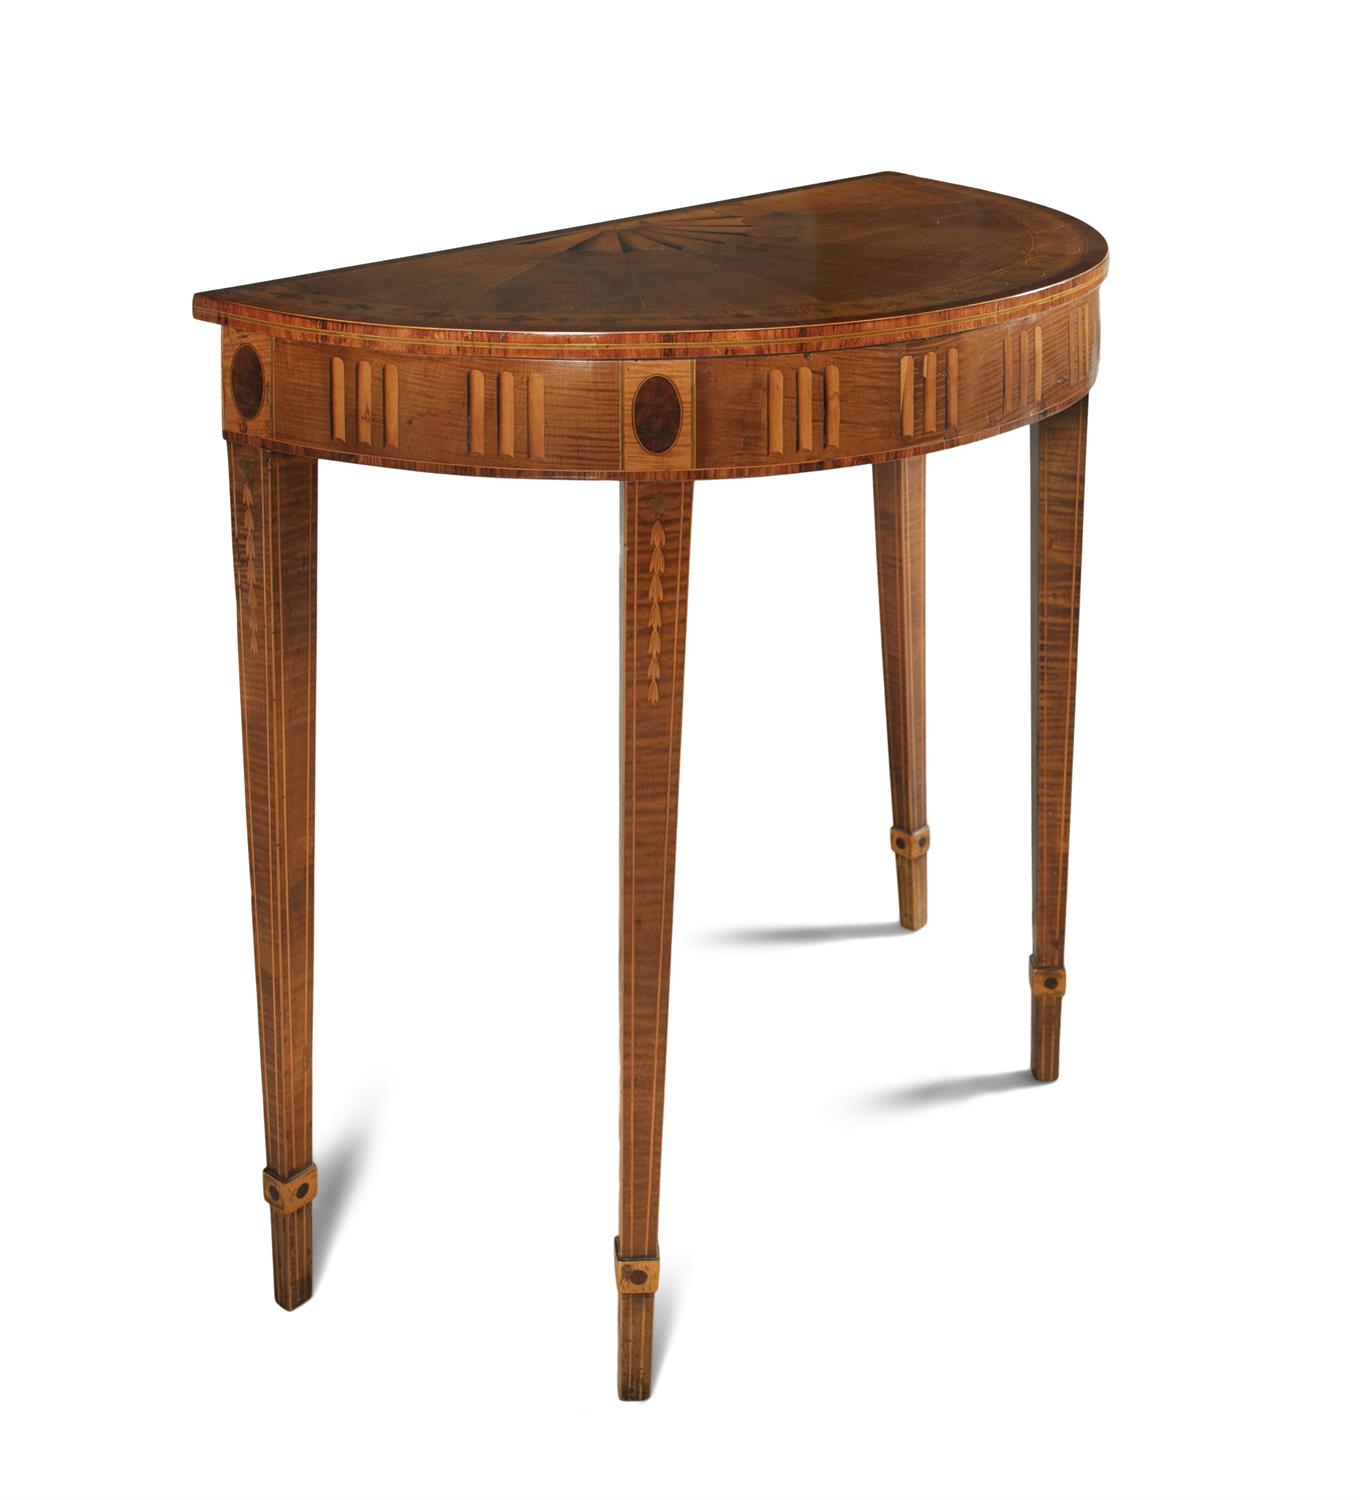 AN IRISH ROSEWOOD BANDED AND SYCAMORE VENEERED D-SHAPED PIER TABLE, c.1780 attributed to William - Bild 3 aus 5